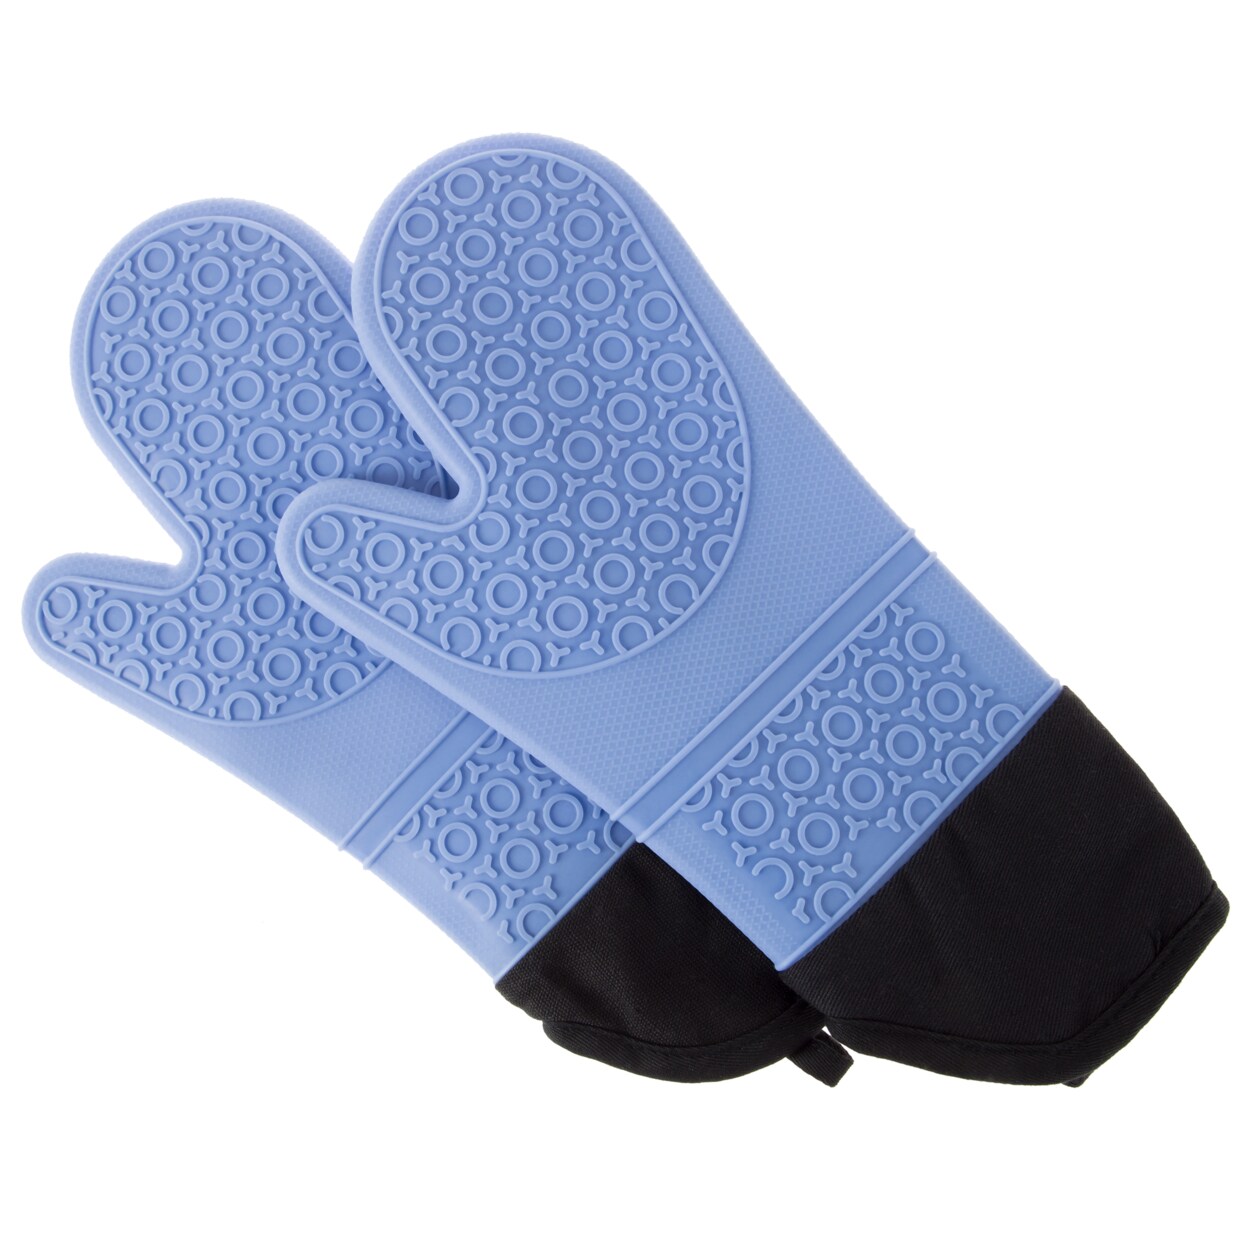 Lavish Home Silicone Oven Mits Extra Long Professional Quality Heat Resistant with Quilted Lining and 2-sided Textured Grip 1 pair